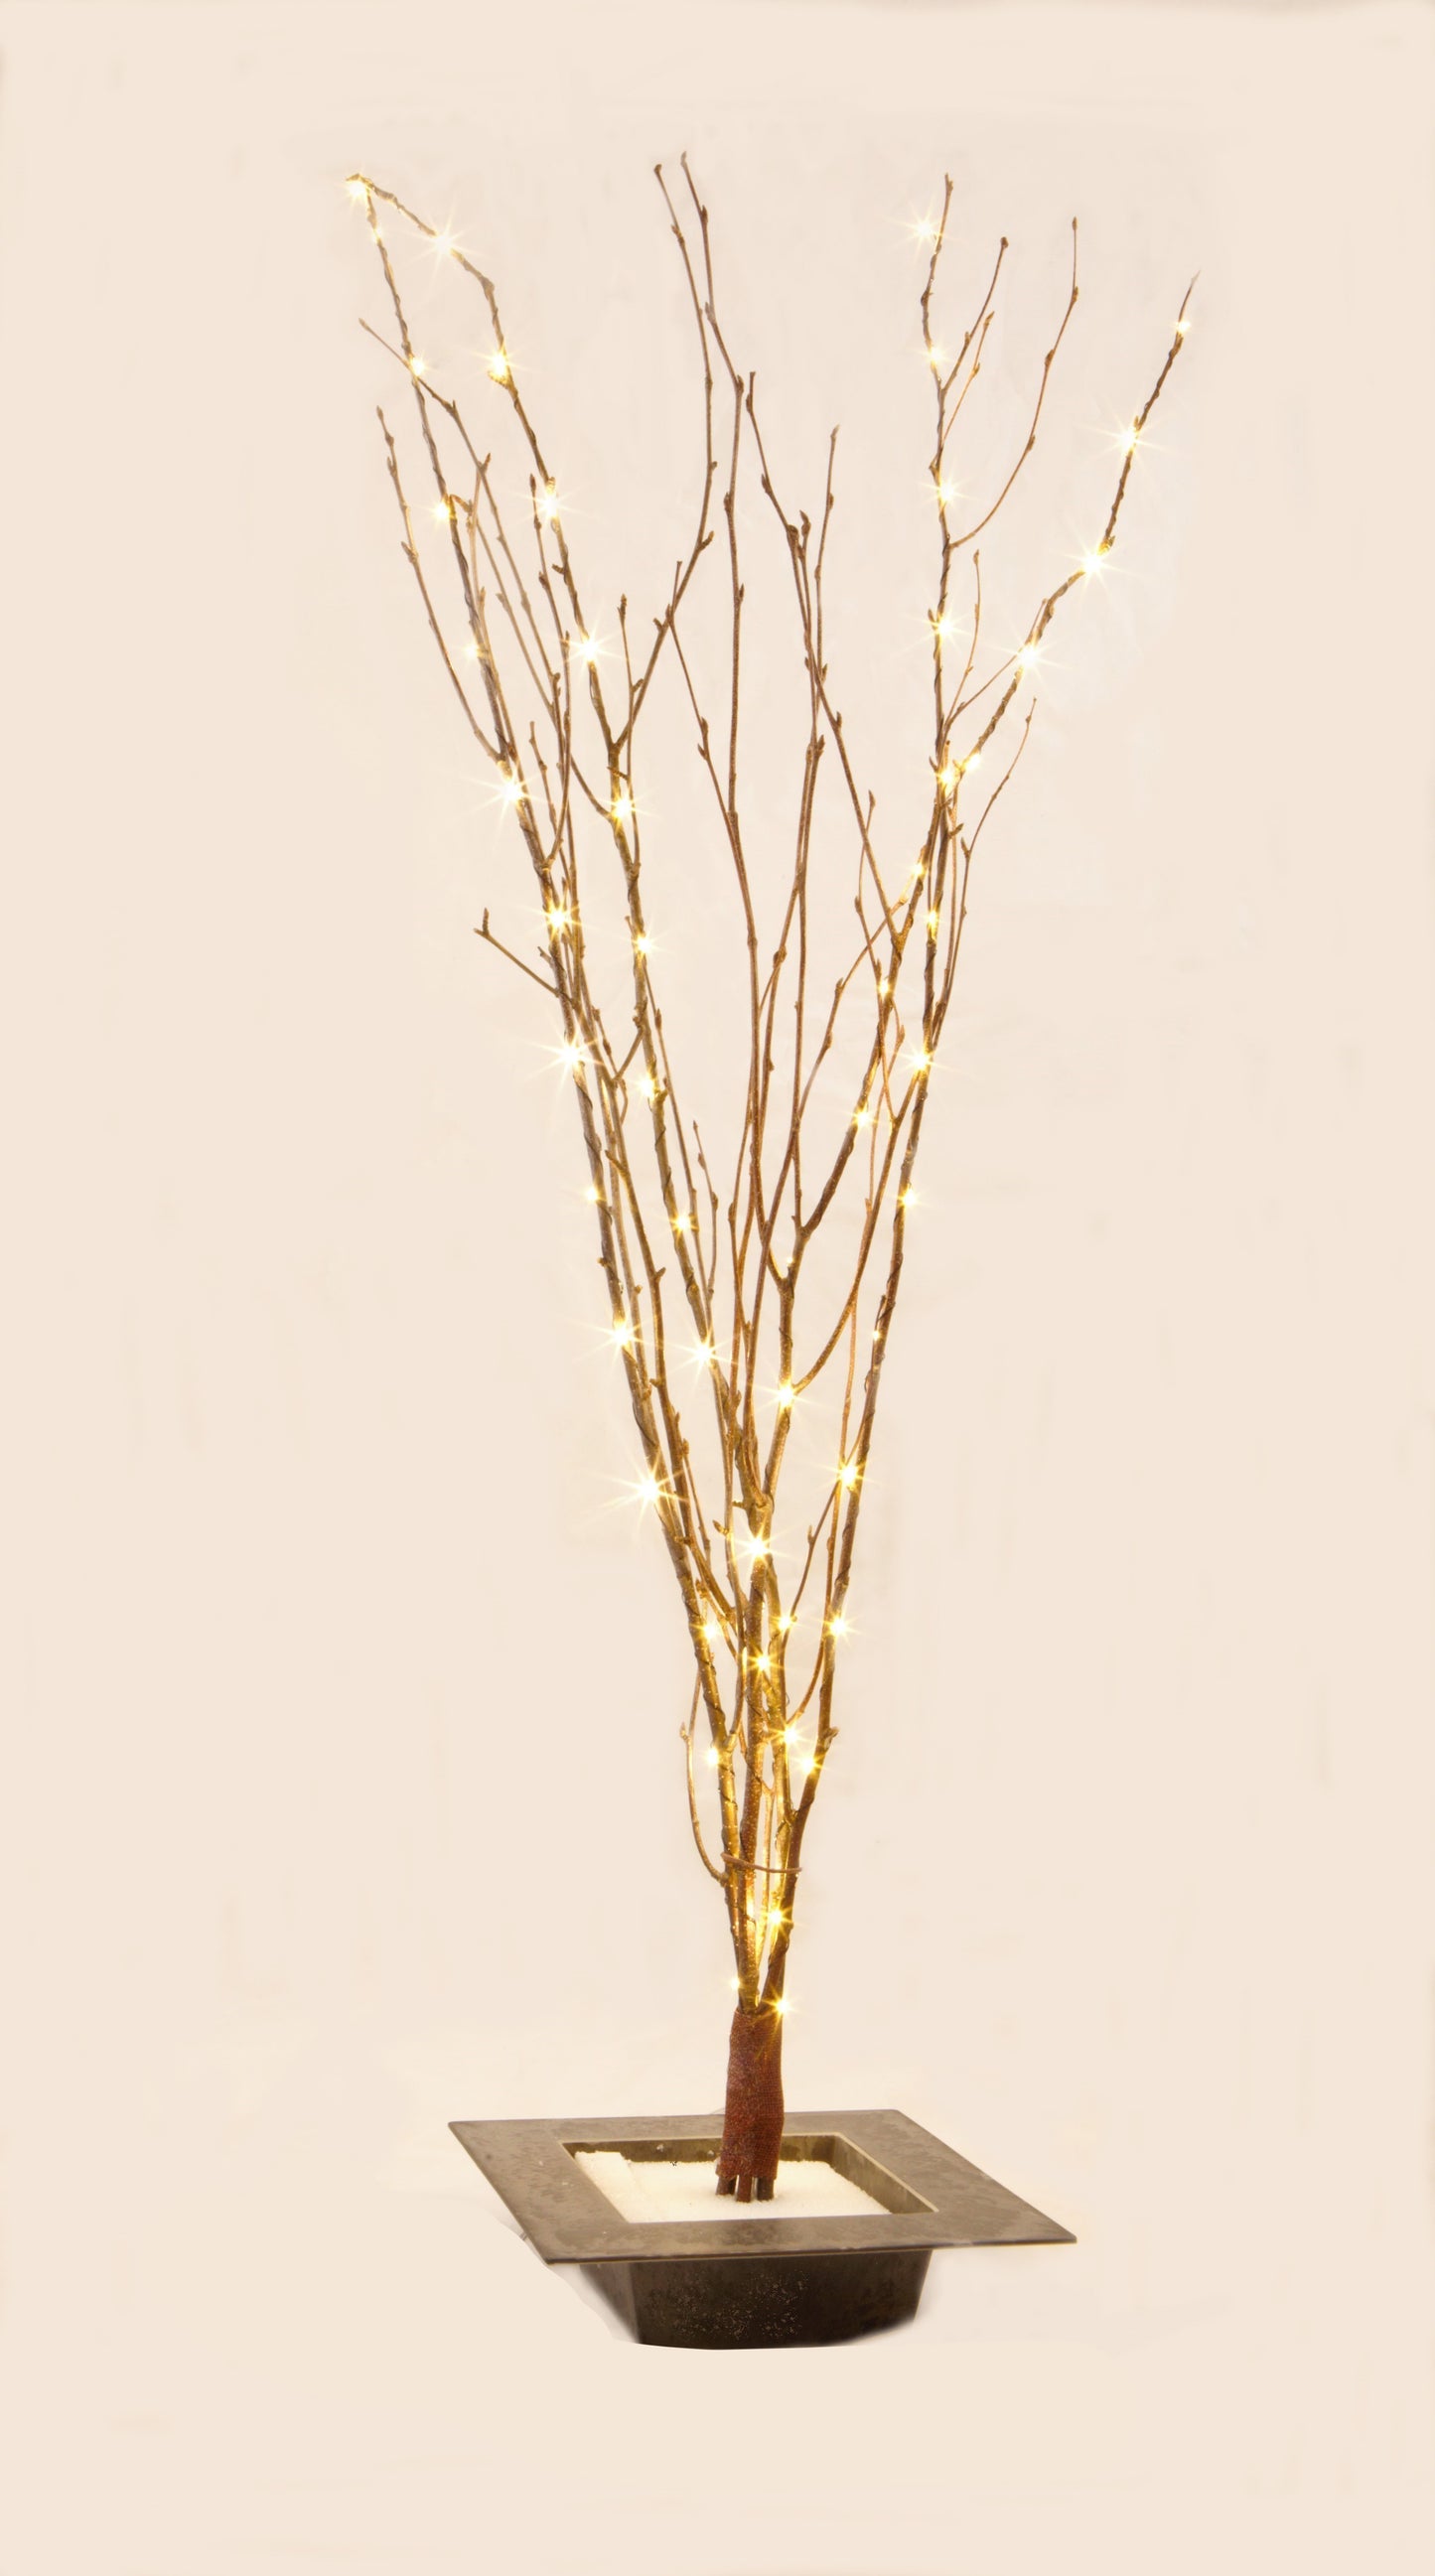 32IN Lighted Birch Twigs, Pack of 2 –